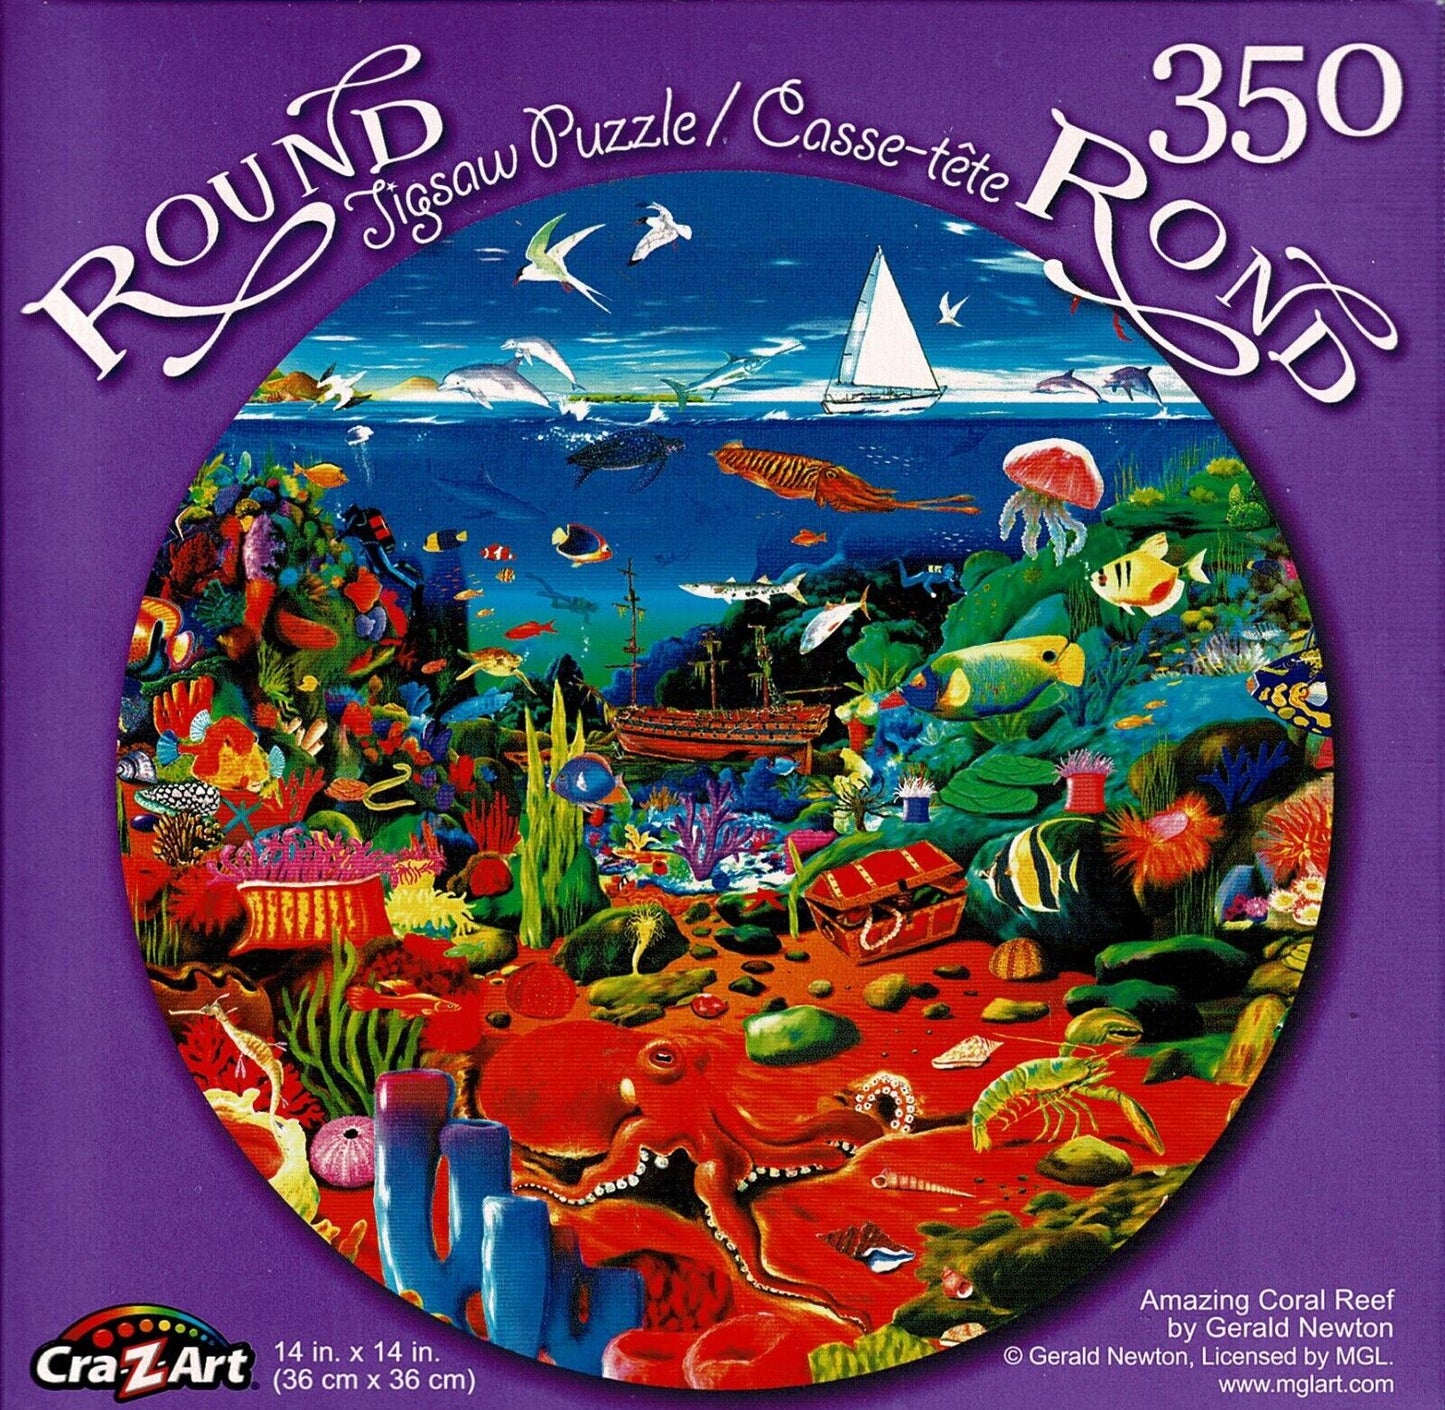 Amazing Coral Reef - 350 Round Piece Jigsaw Puzzle